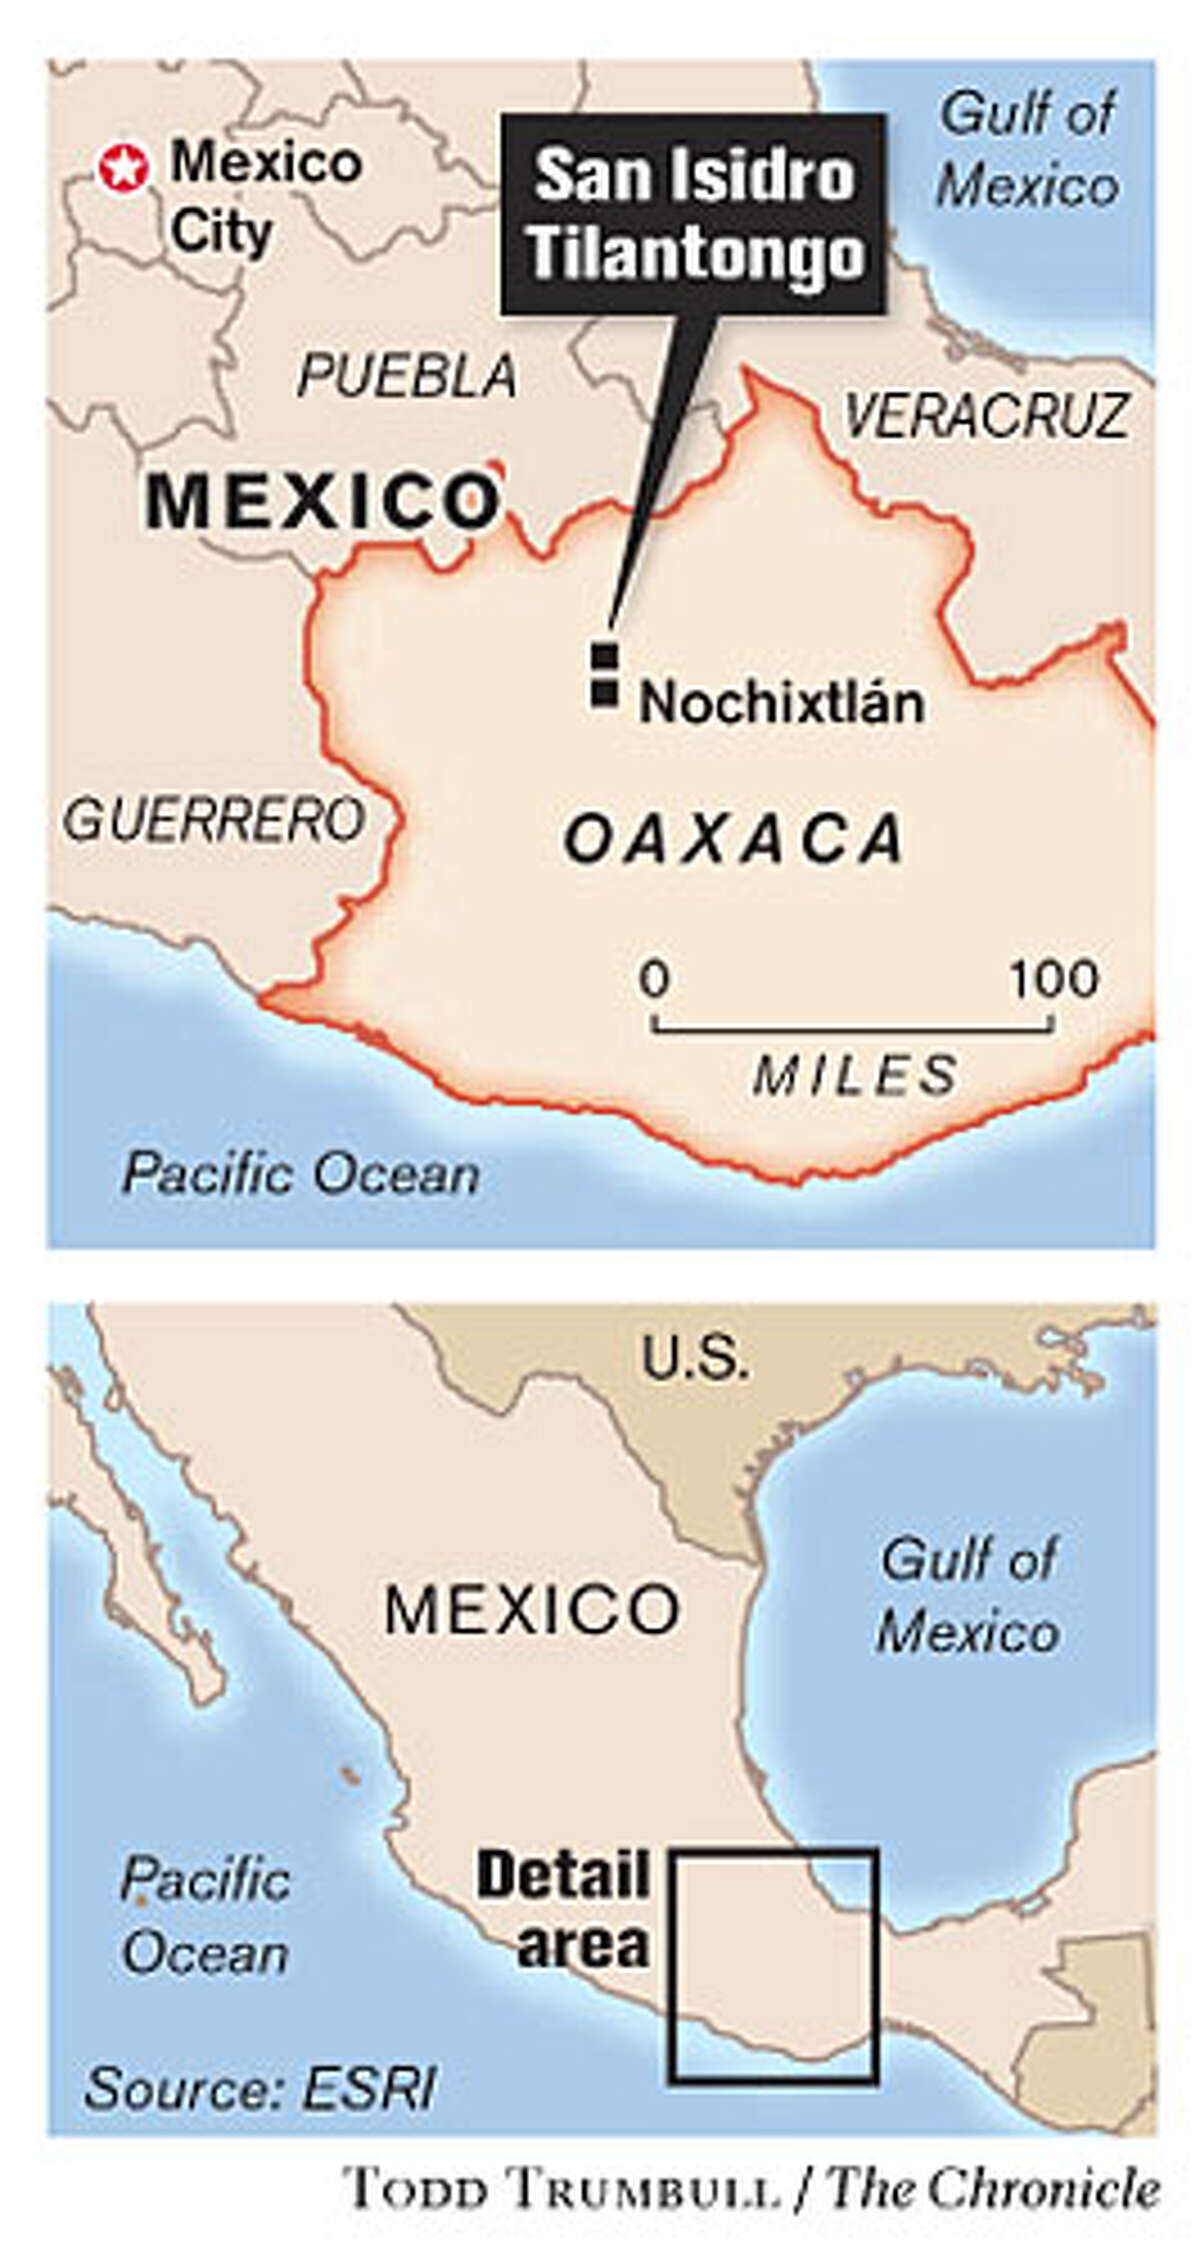 Oaxaca, Mexico. Chronicle graphic by Todd Trumbull